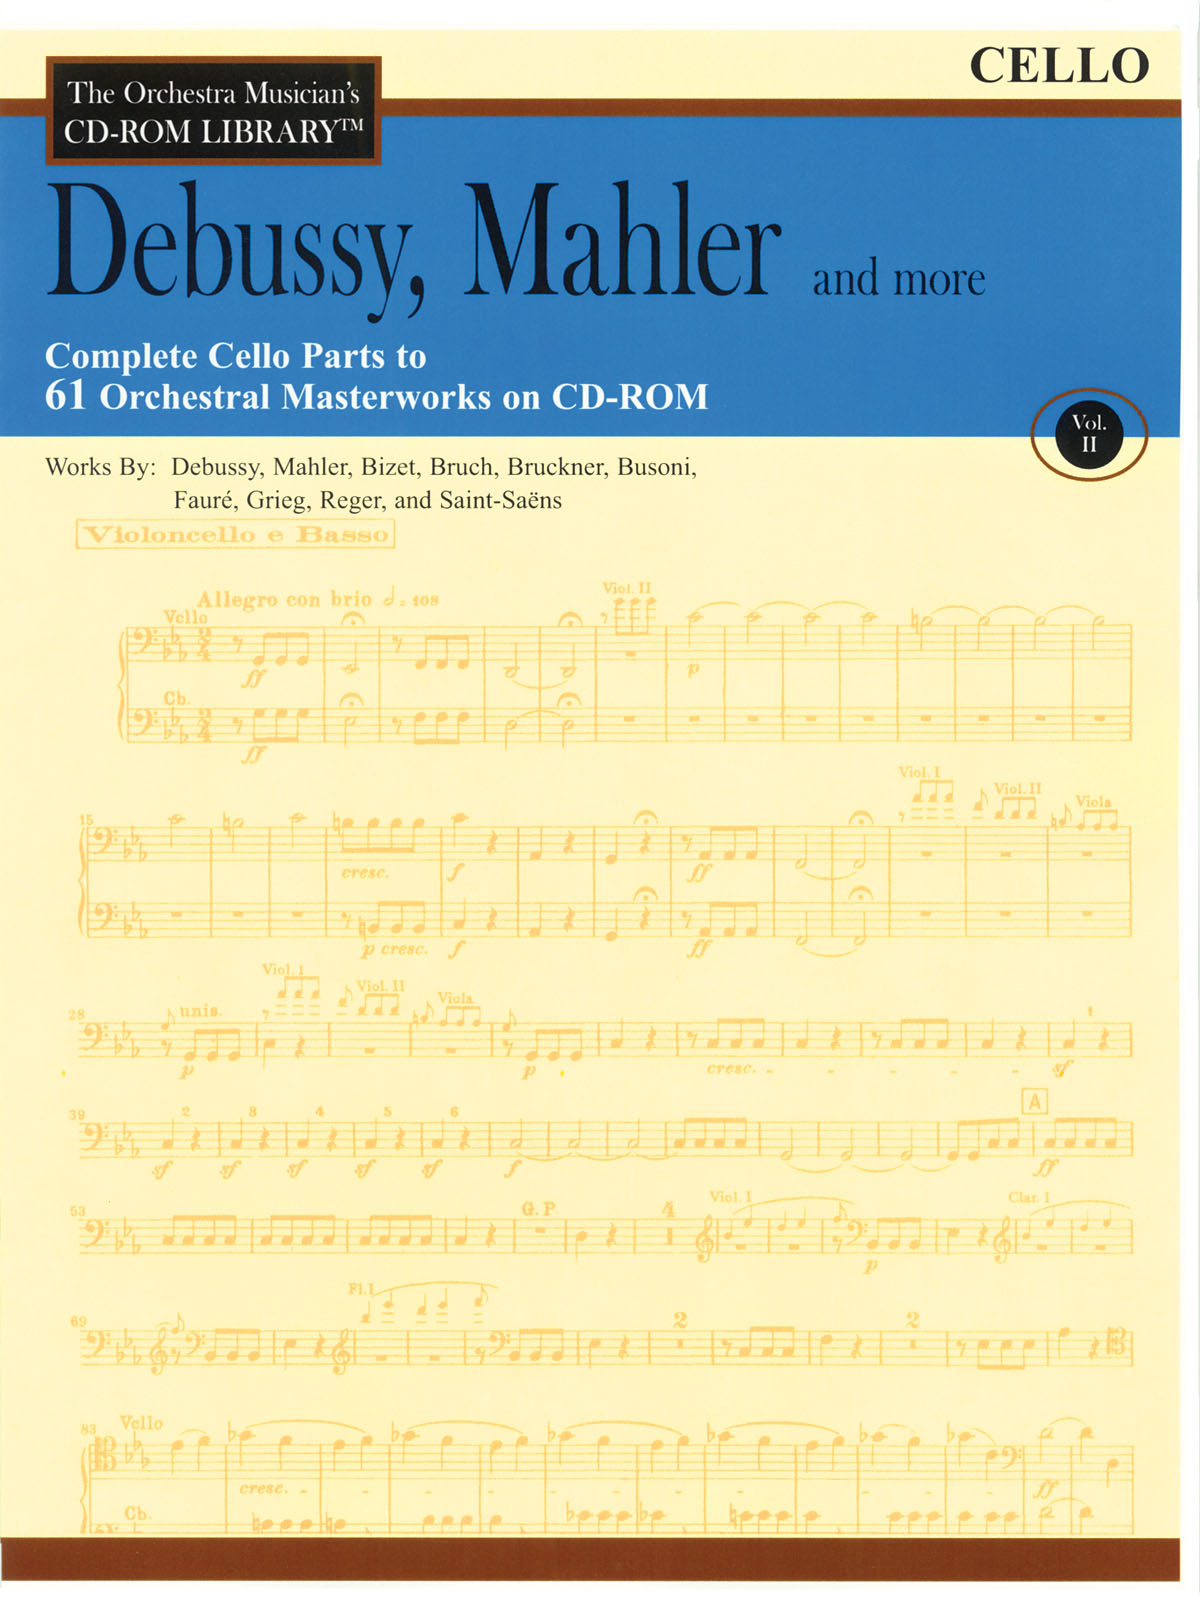 Debussy, Mahler and More - Volume 2(The Orchestra Musician's CD-ROM Library - Cello)